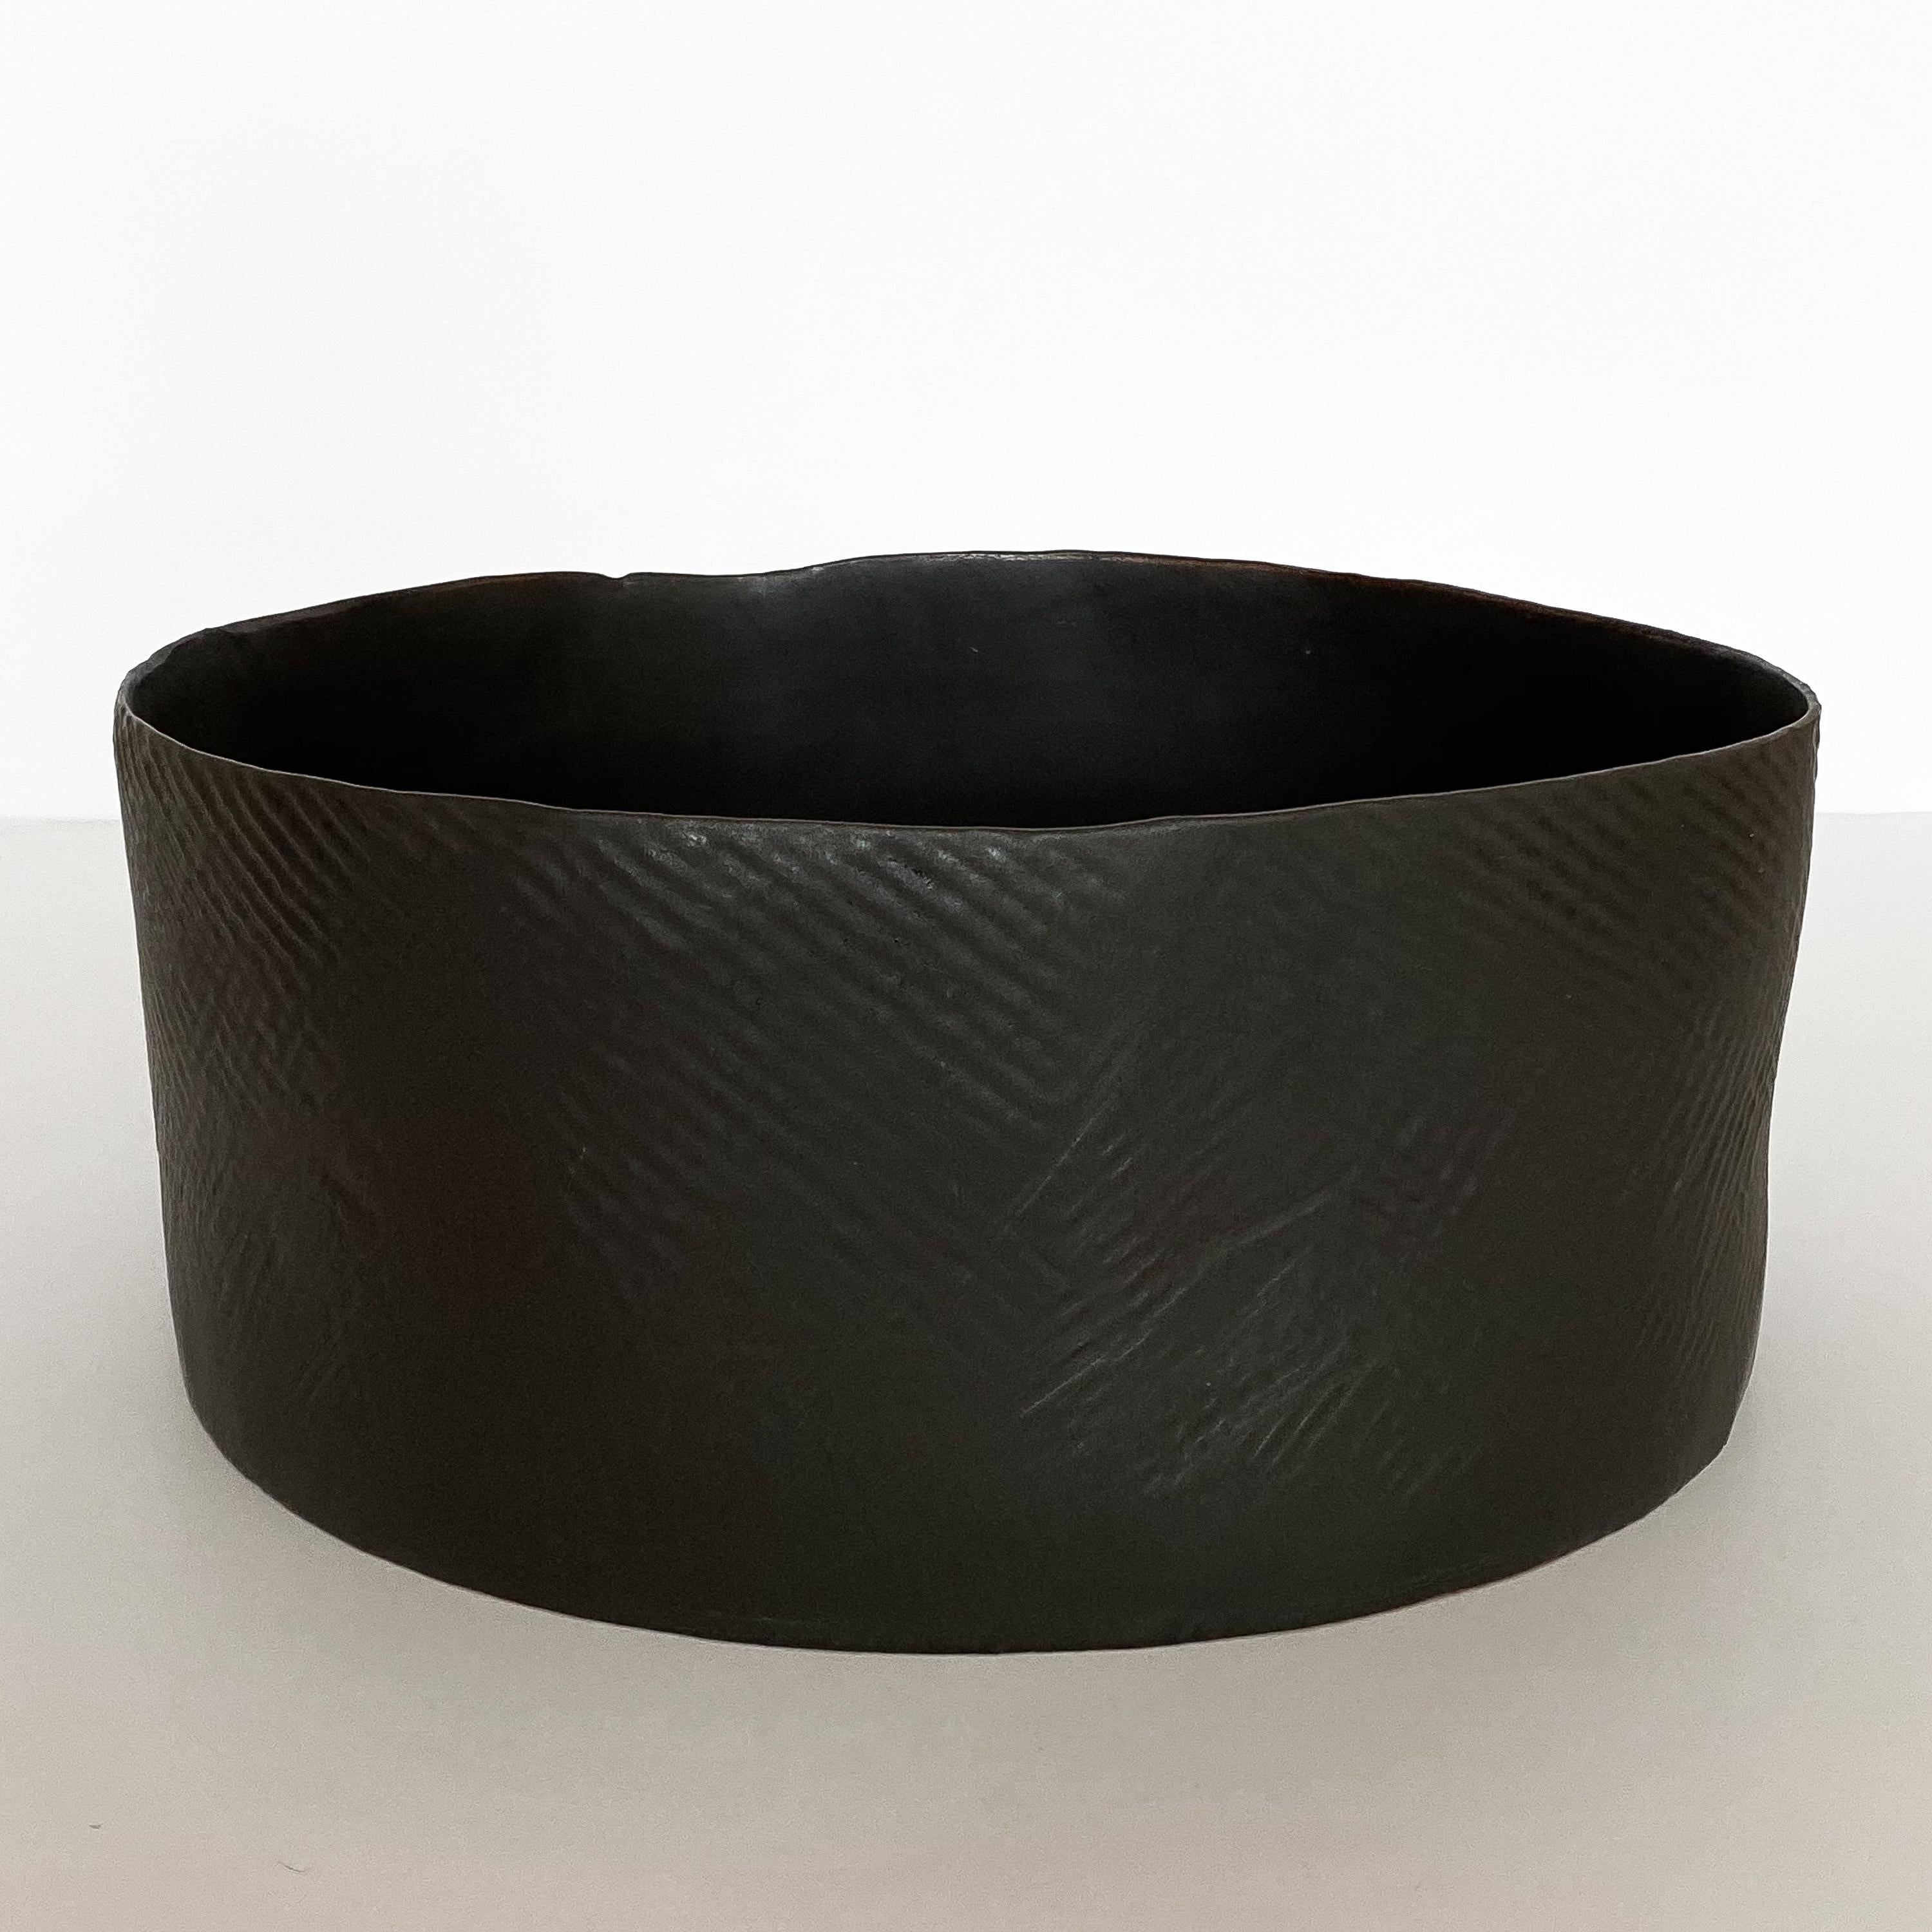 Matte black glazed earthenware bowl with textured exterior by Diana Gillispie. Minimalist and modern in form. Measures: 5.75